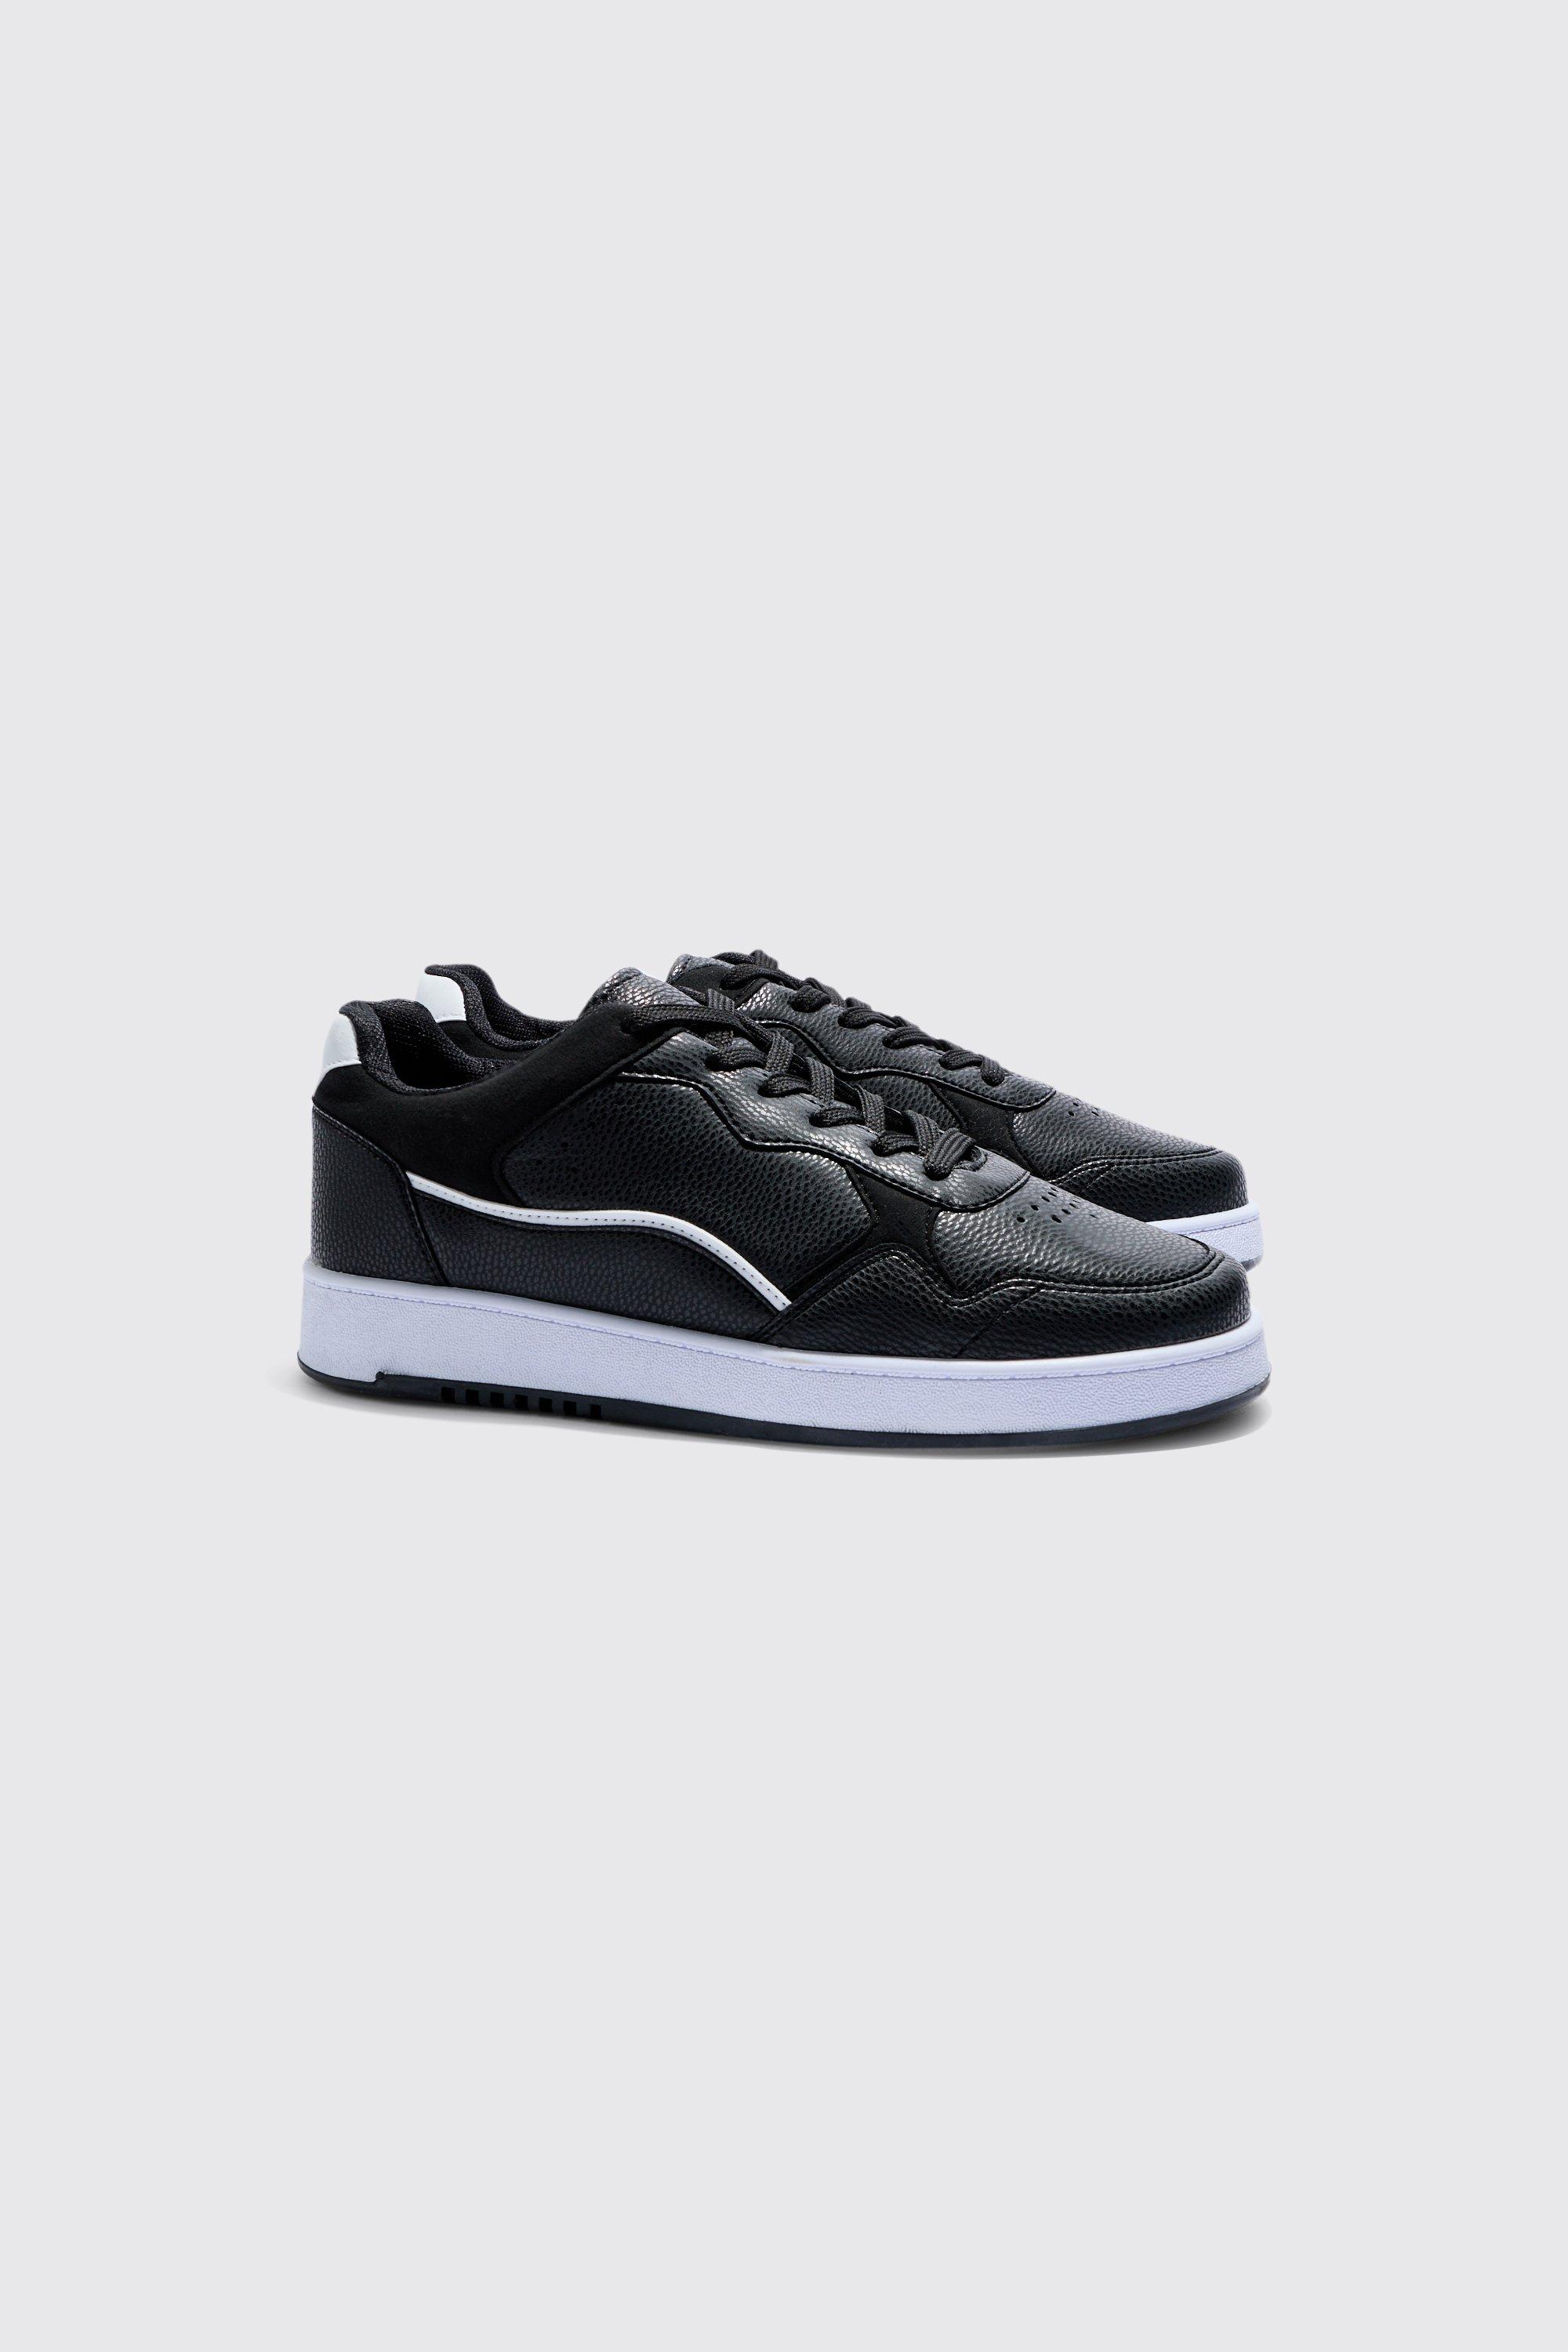 Image of Multi Panel Chunky Sole Trainers In Black, Nero